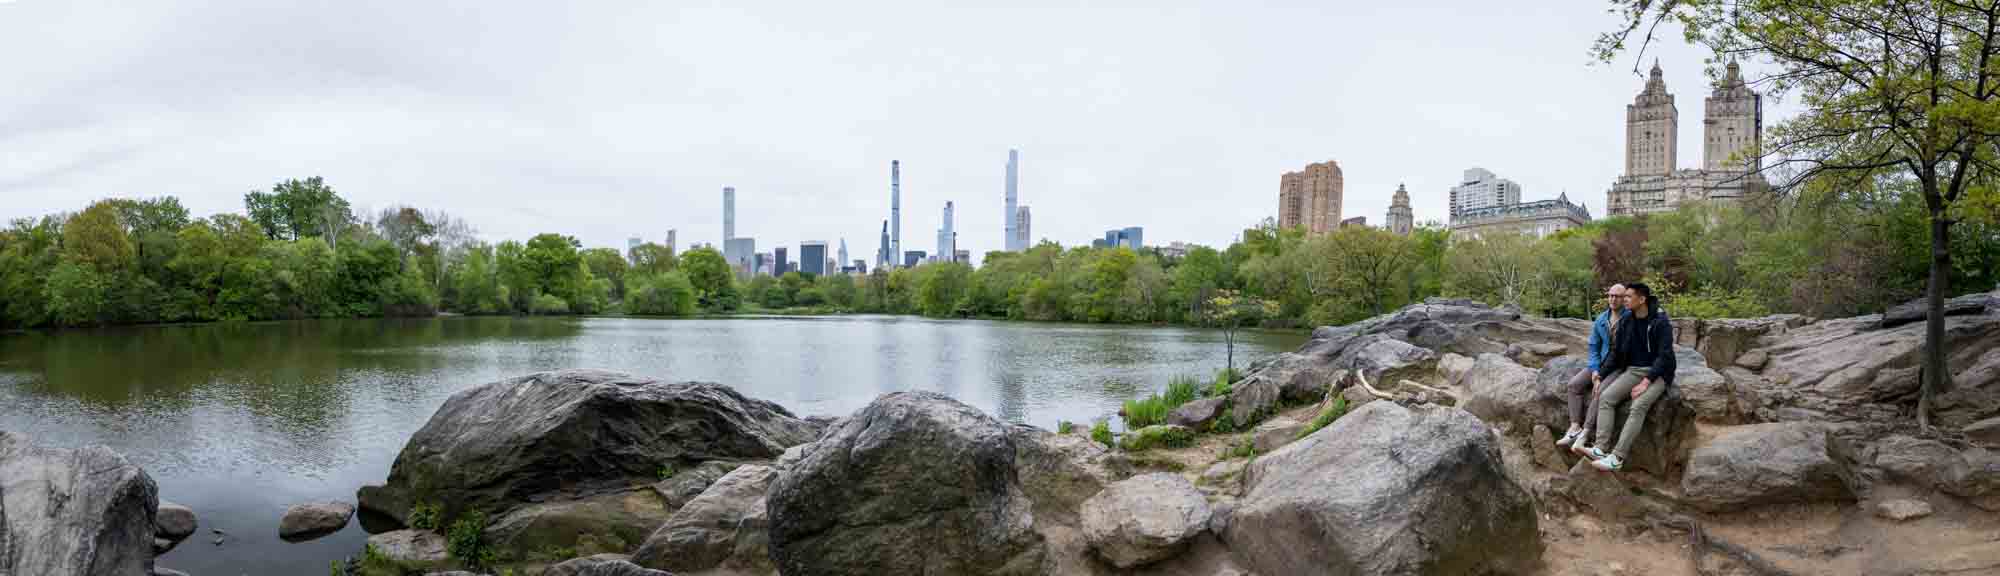 Panoramic view of two men sitting on rock in front of Central Park Lake